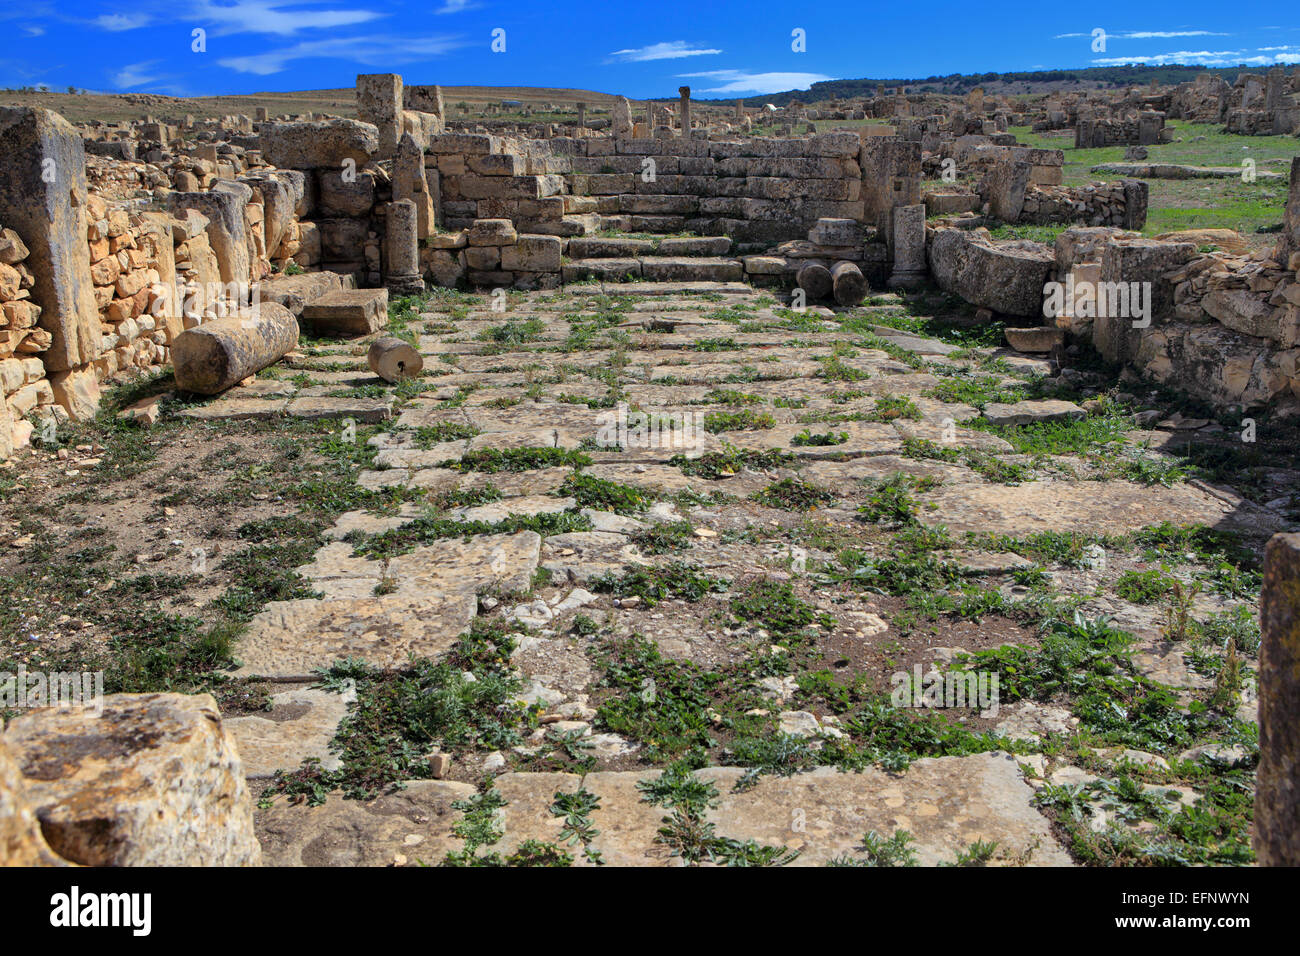 Ruins of ancient city of Madauros, M'Daourouch, Souk Ahras Province, Algeria Stock Photo